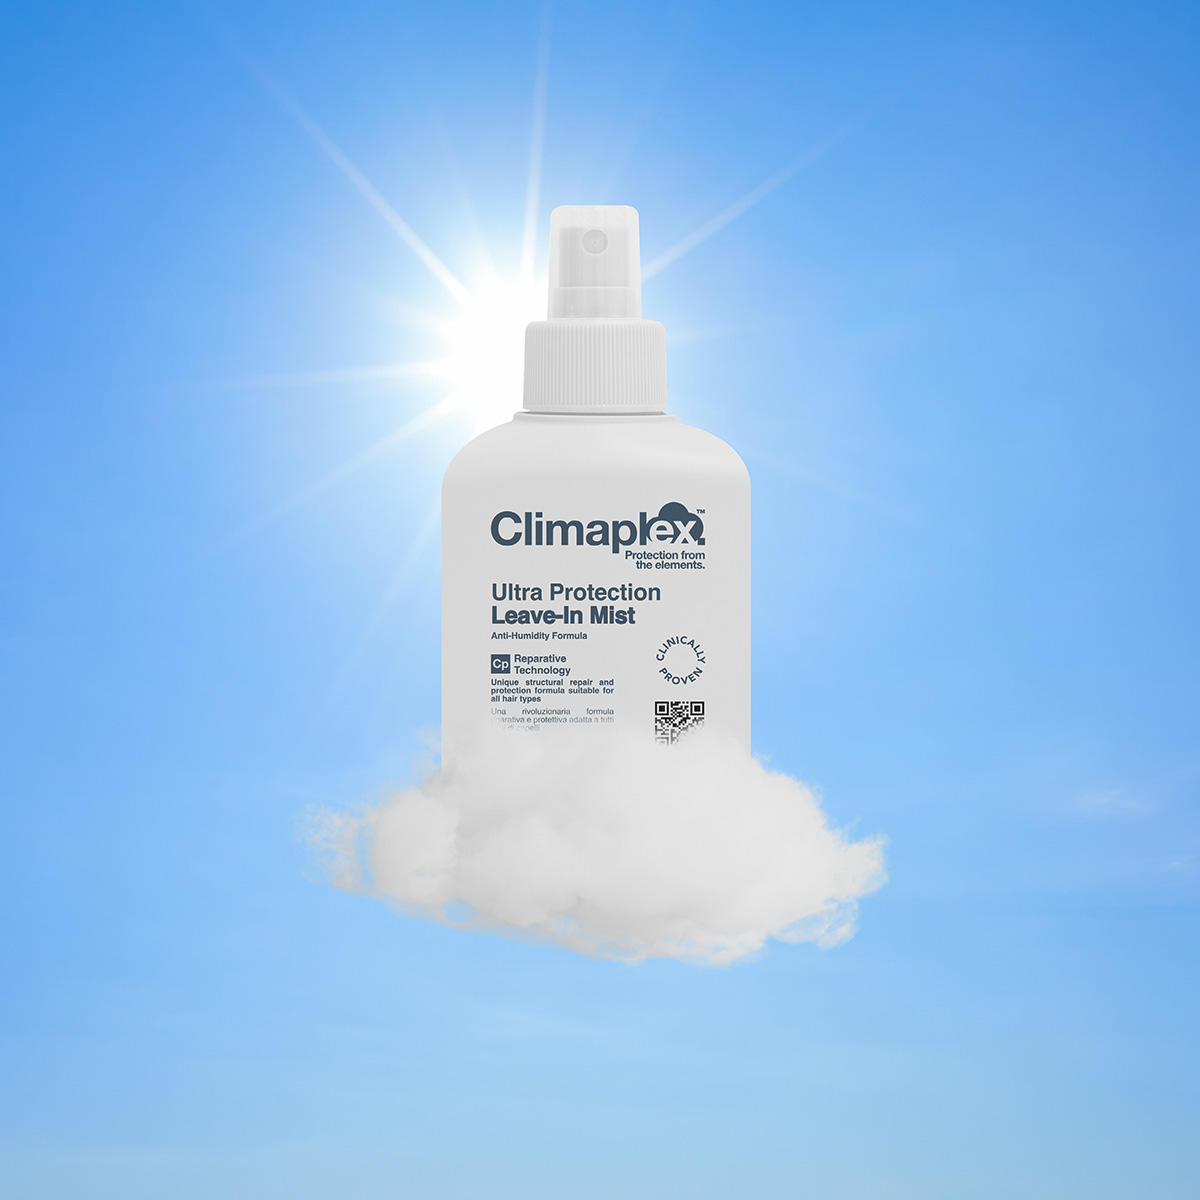 Climaplex Ultra Protection Leave-In Mist 150 ml - 3